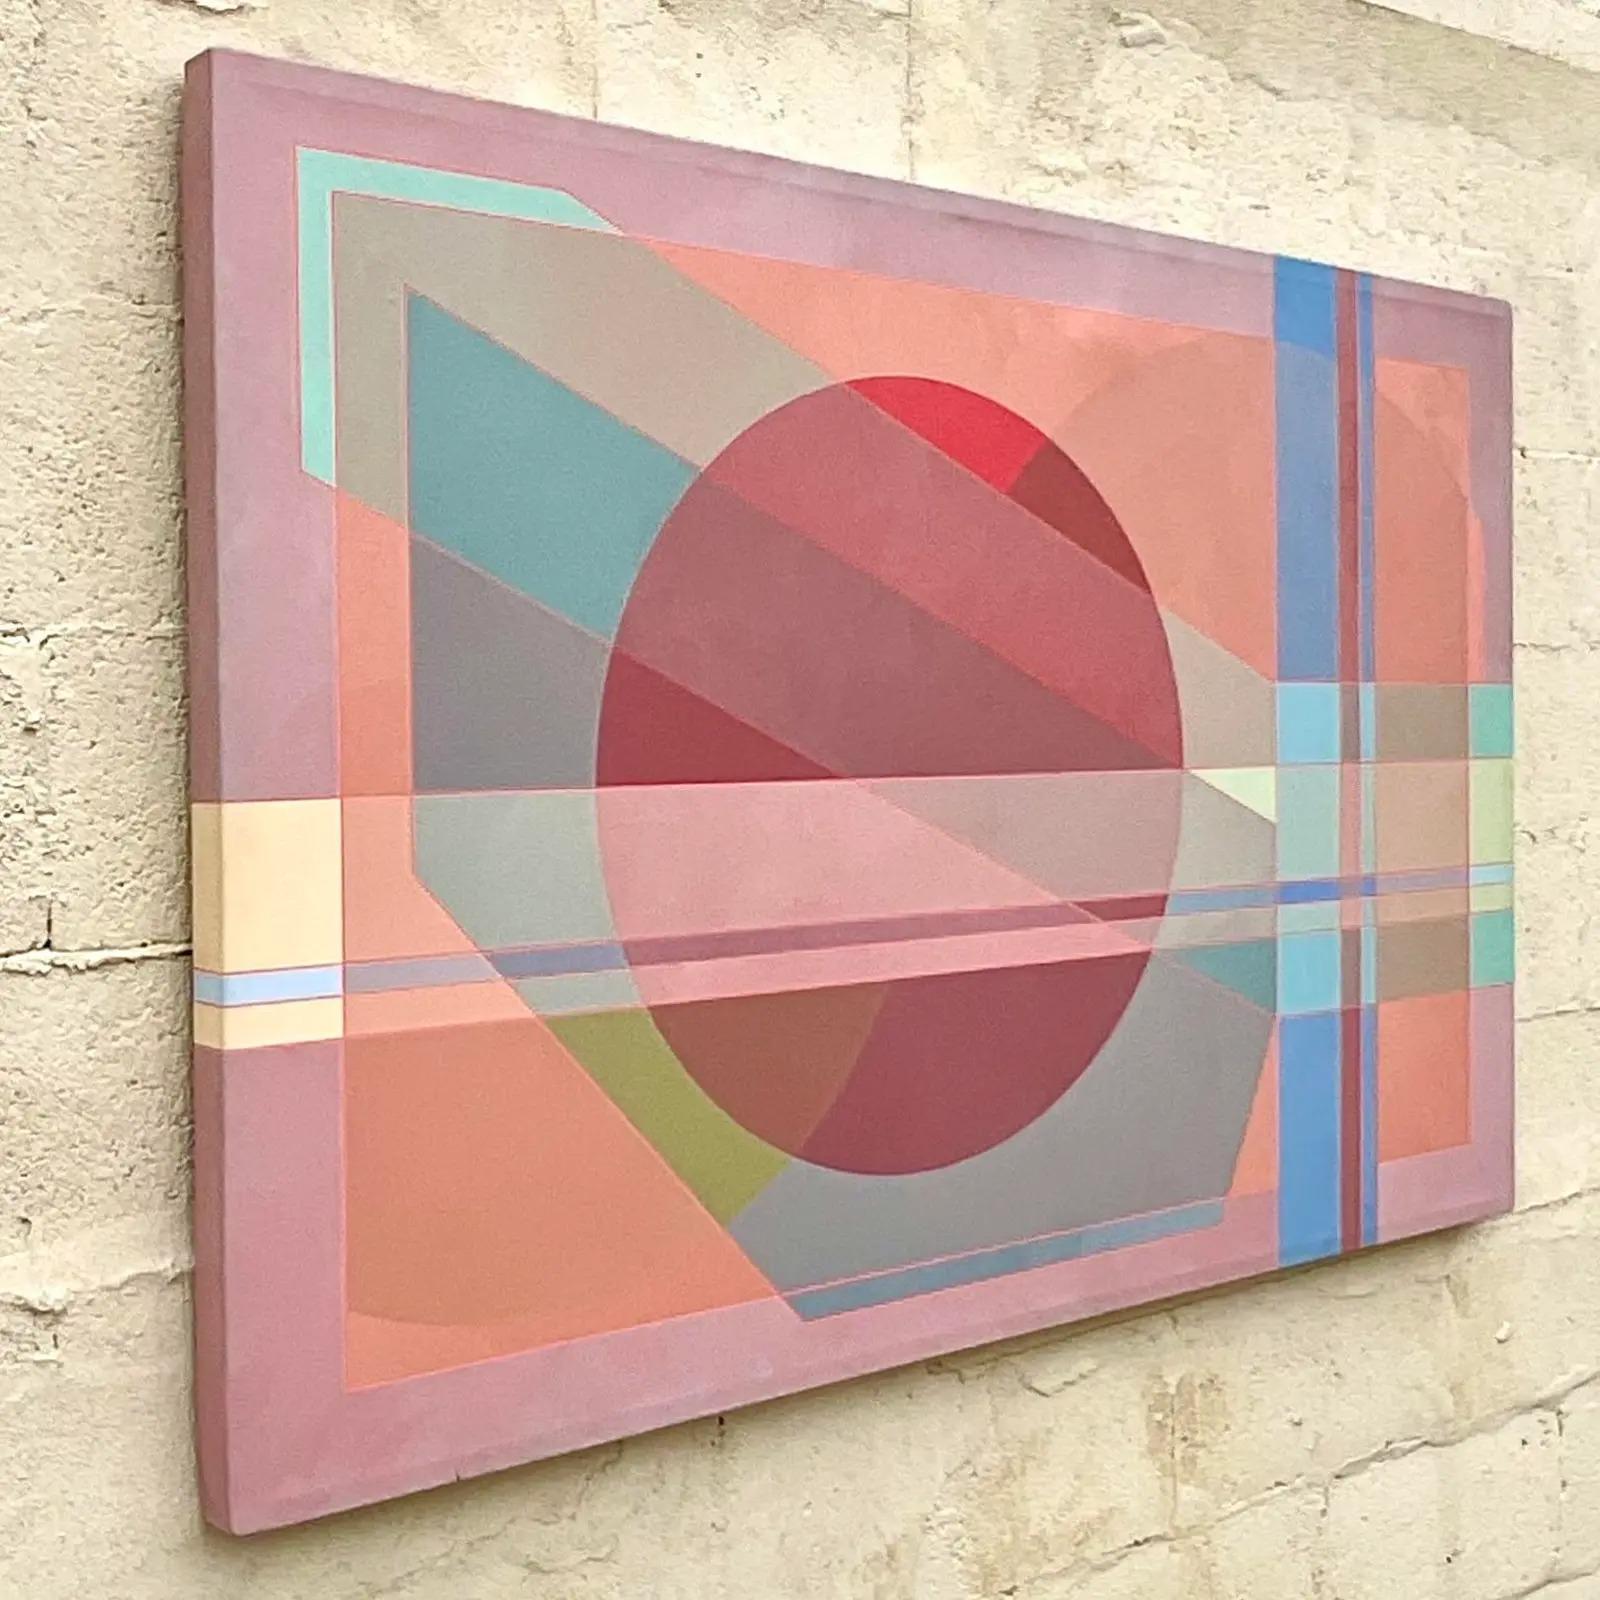 A brilliant vintage Contemporary Abstract original oil painting on canvas. A geometric composition in muted colors. Signed by the artist. Acquired from a Palm Beach estate.